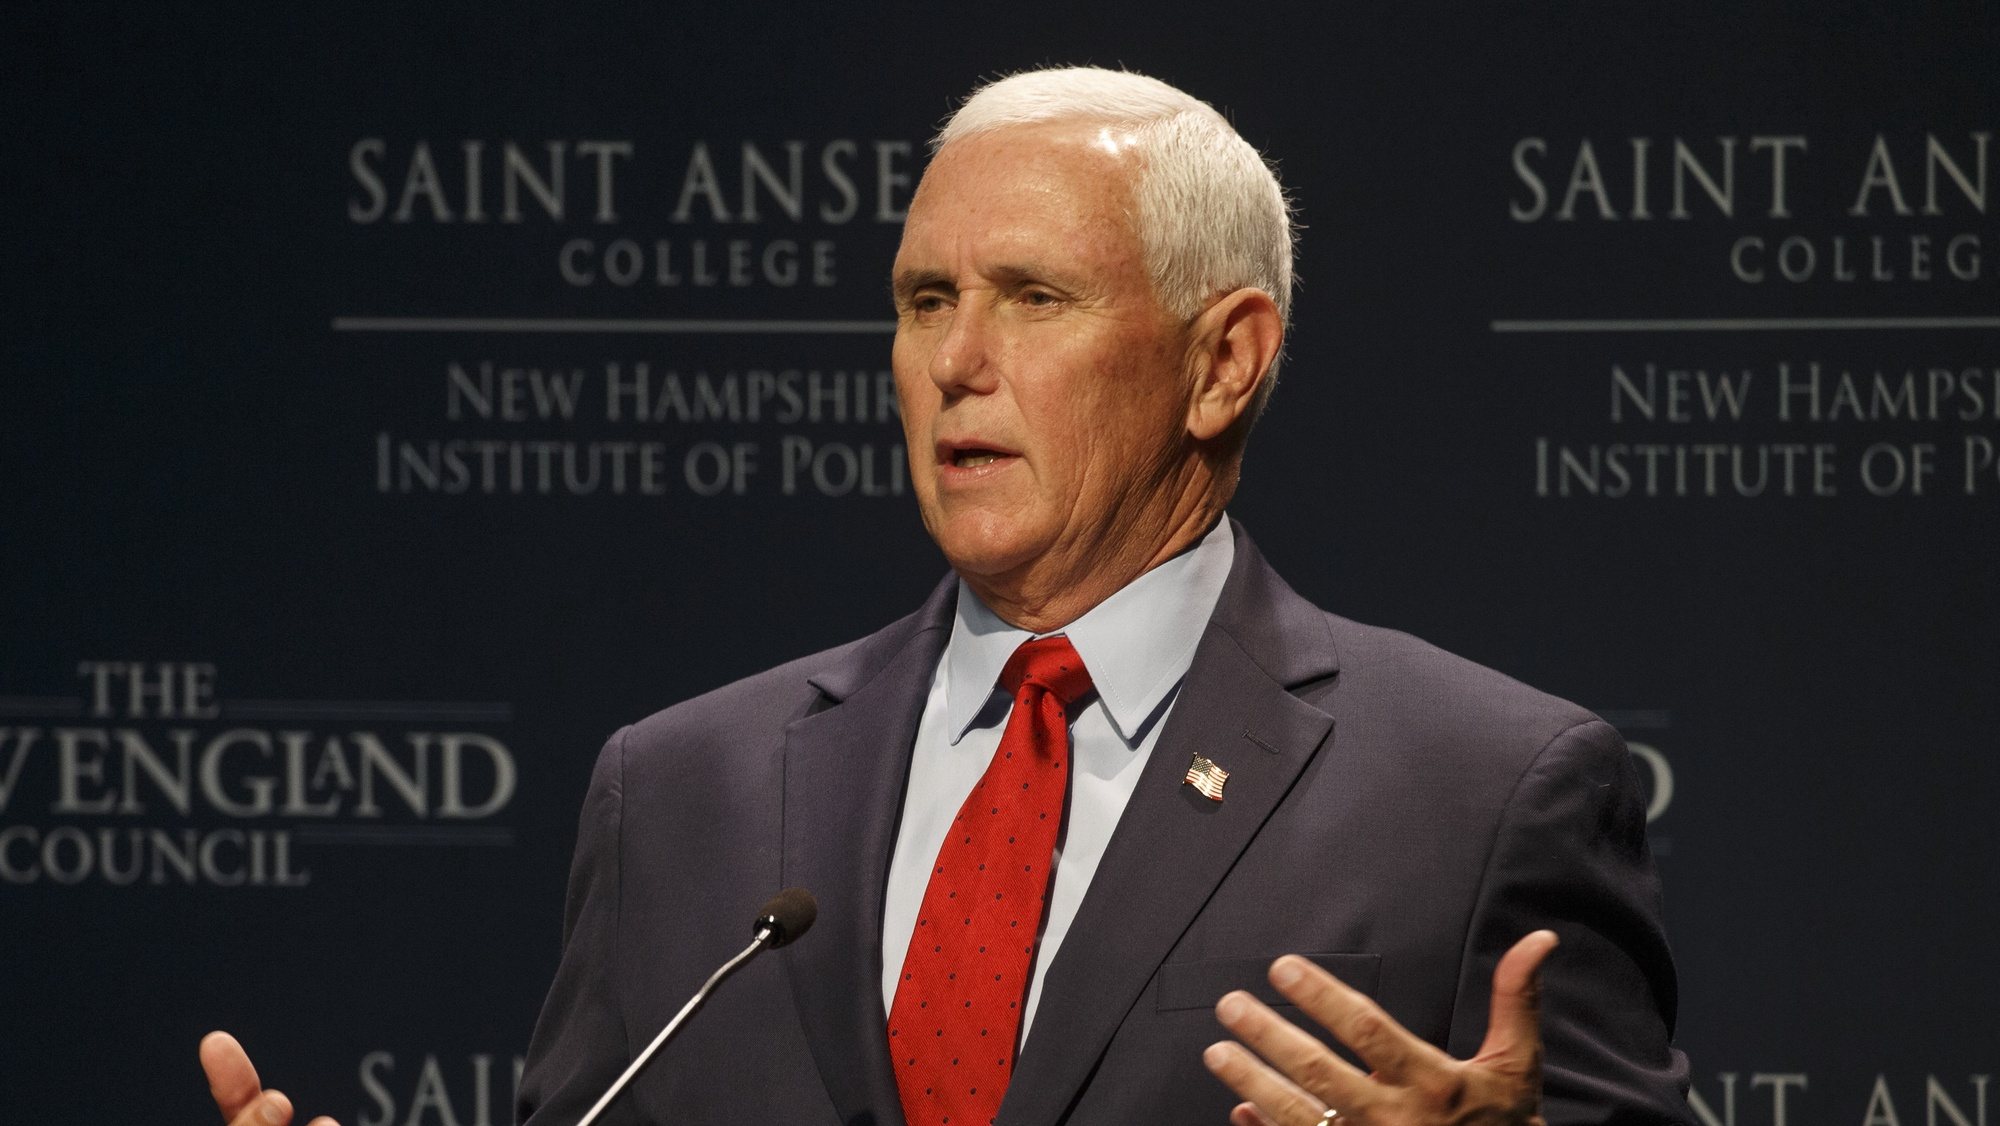 epa10125703 Former US Vice President Mike Pence addresses an audience during a visit to the &#039;Politics and Eggs,&#039; business gathering of the New Hampshire Institute of Politics, at St Anselm College in Manchester, New Hampshire, USA, 17 August 2022. Pence was on a one-day visit to the State of New Hampshire to campaign for local Republican candidates and address Republican voters ahead of the 2022 midterm elections.  EPA/CJ GUNTHER